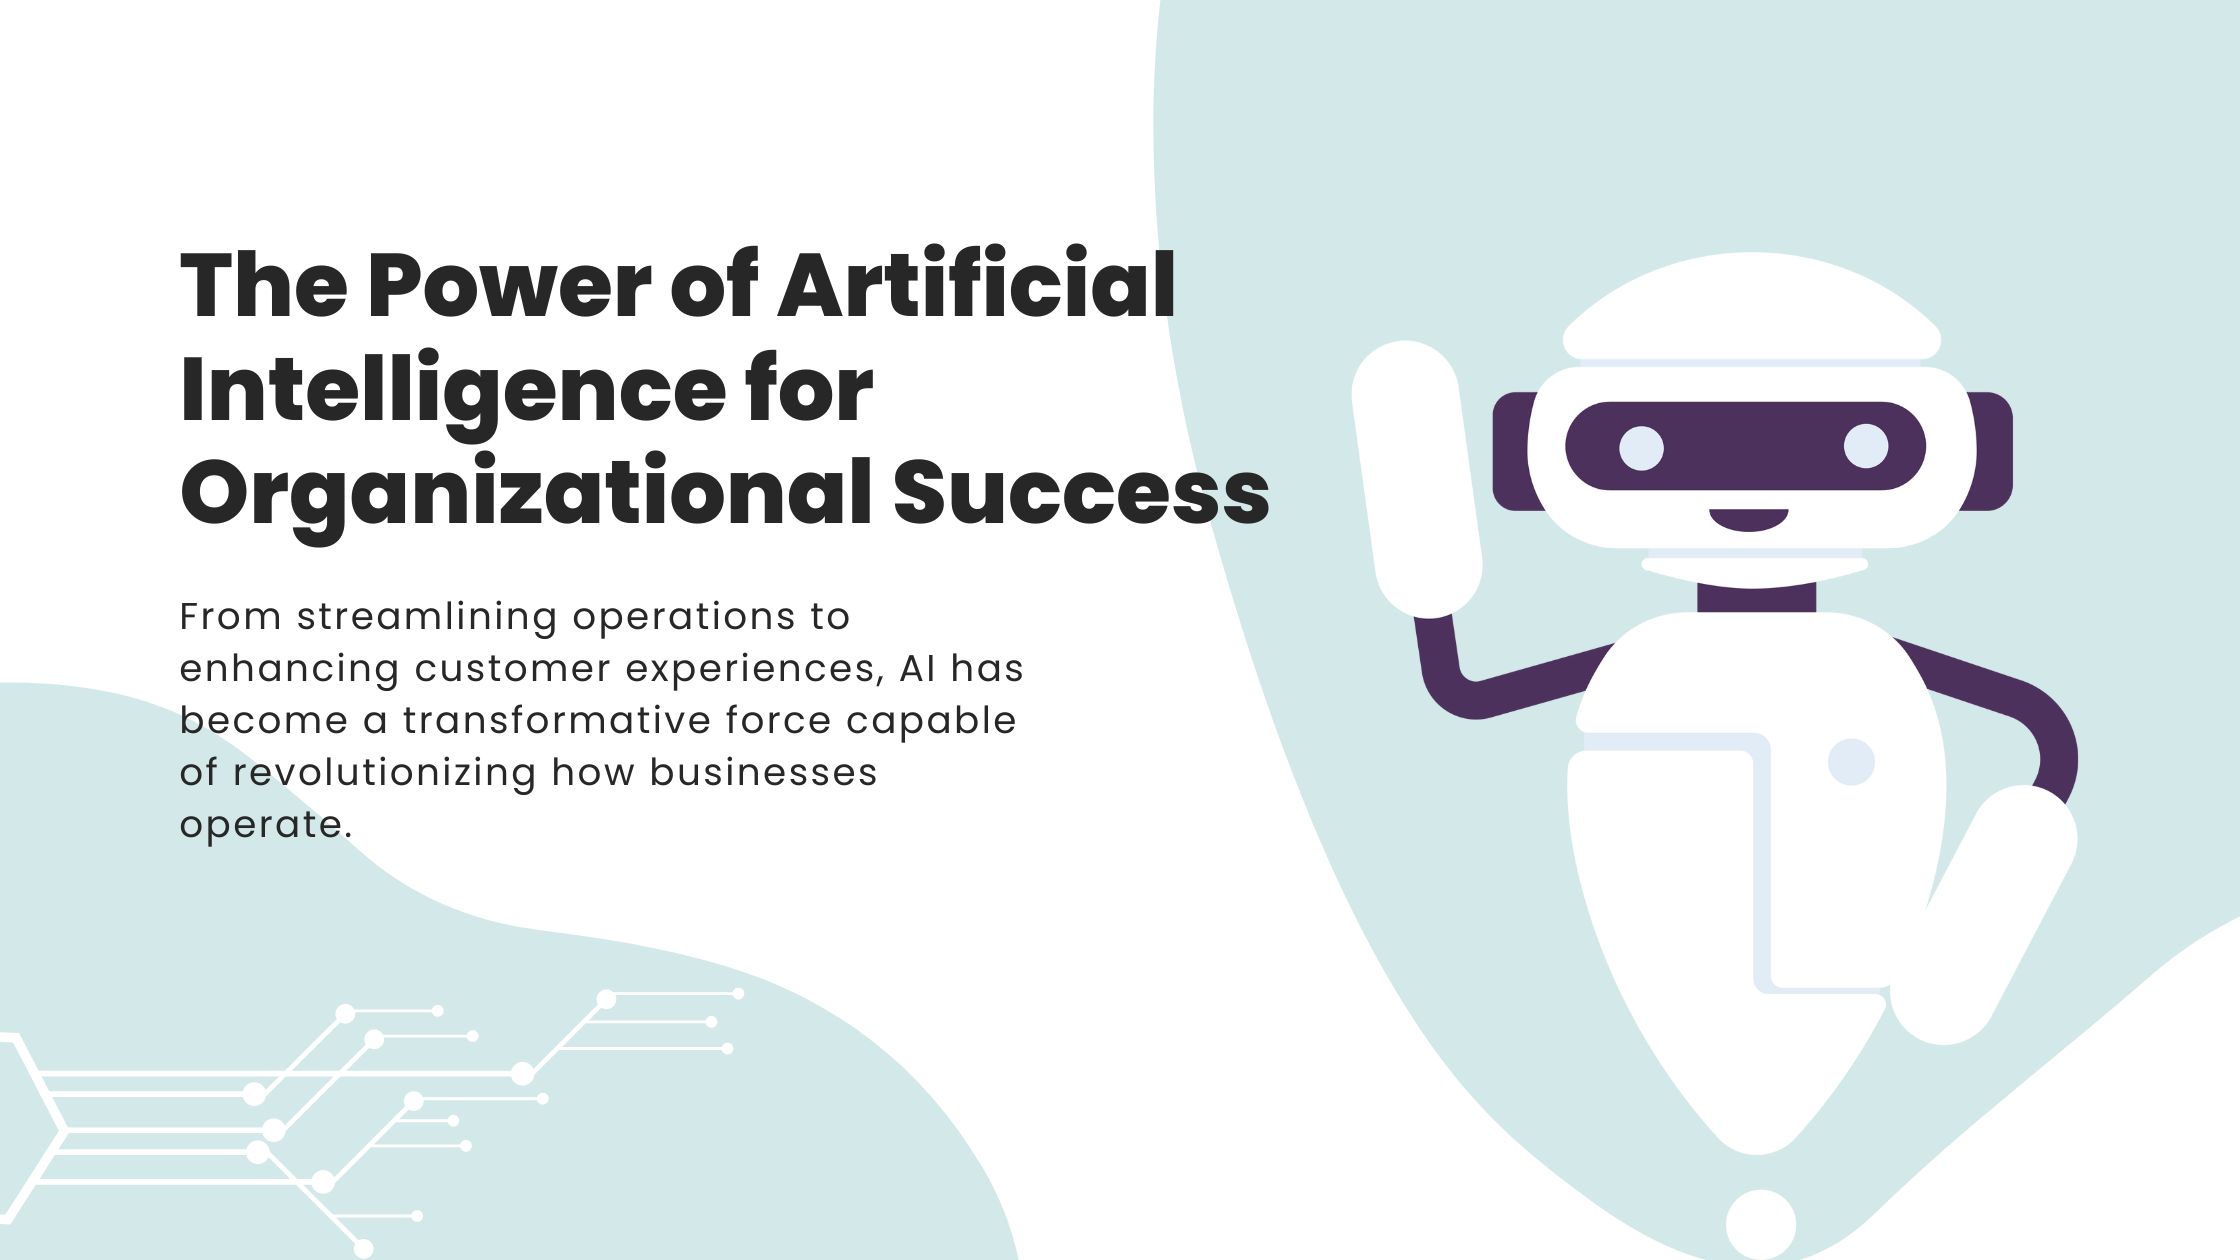 photo_The Power of Artificial Intelligence for Organizational Success.jpg